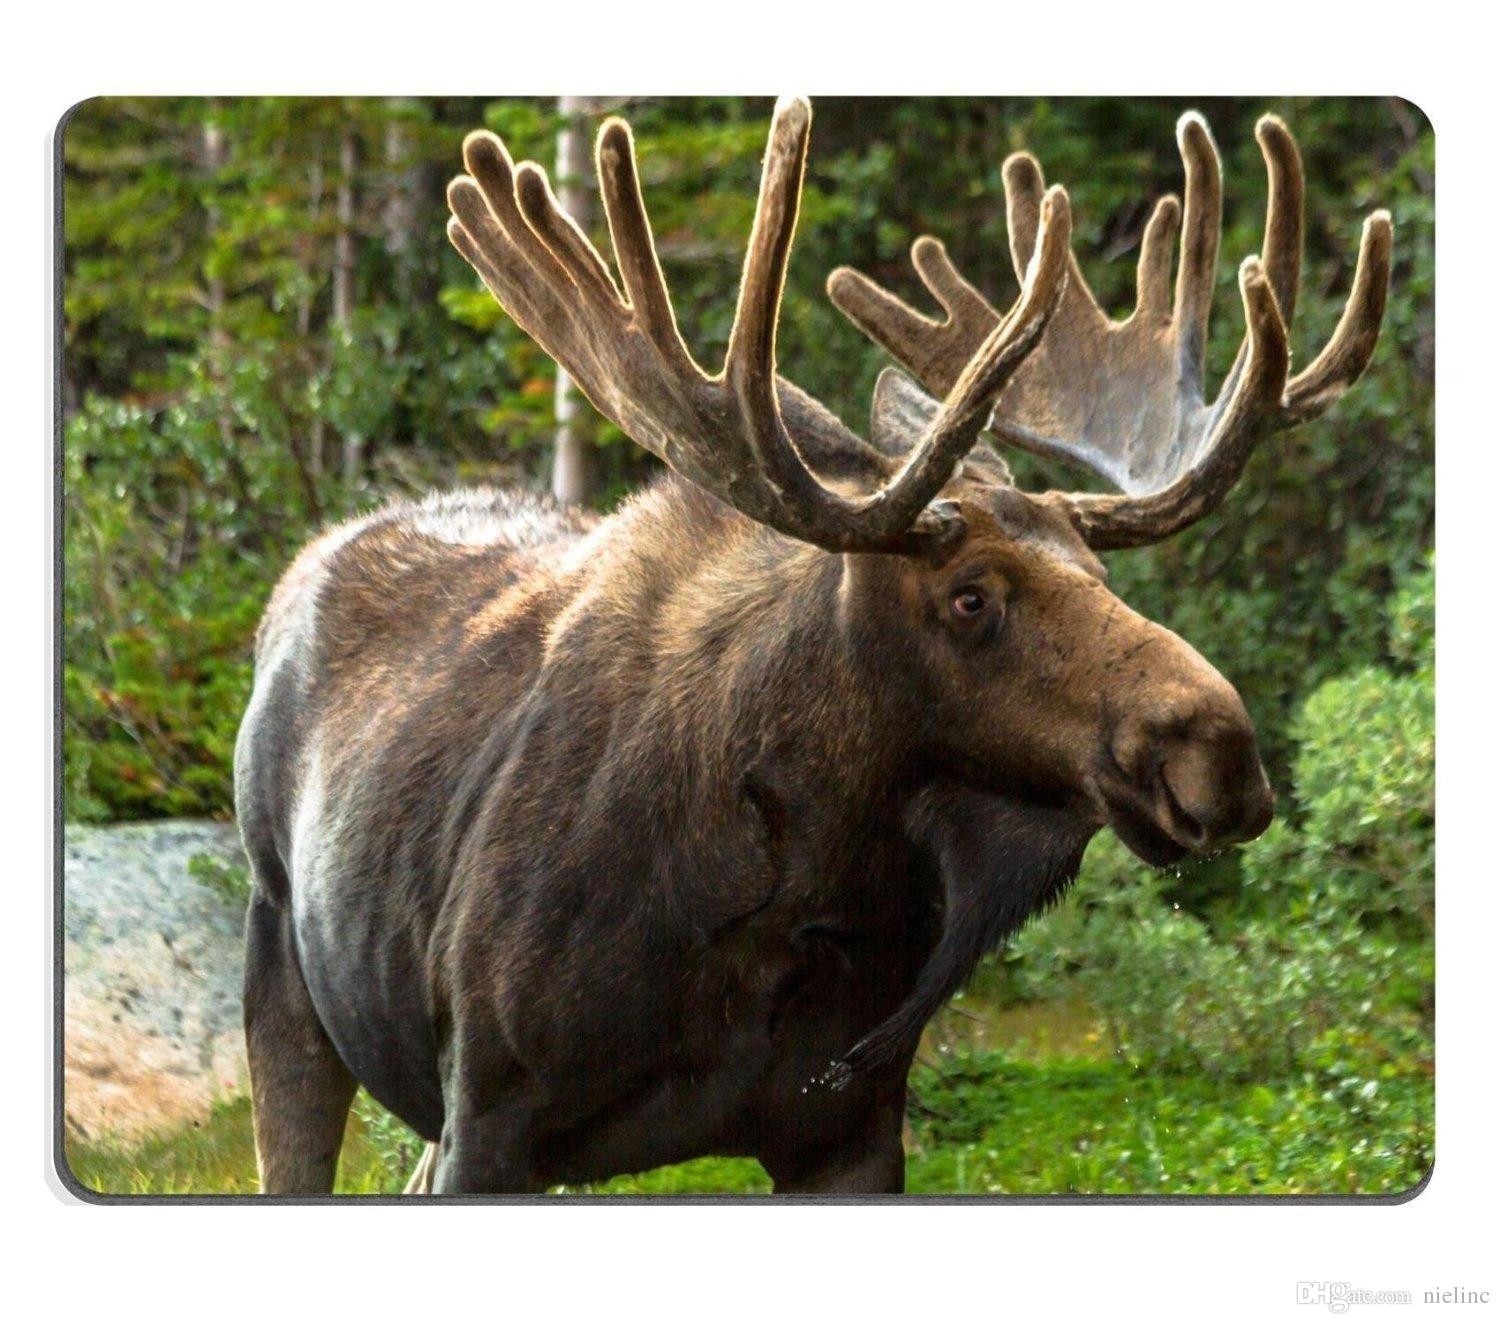 Side View Of Large Bull Moose Standing At Forest Edge Image Mouse ...